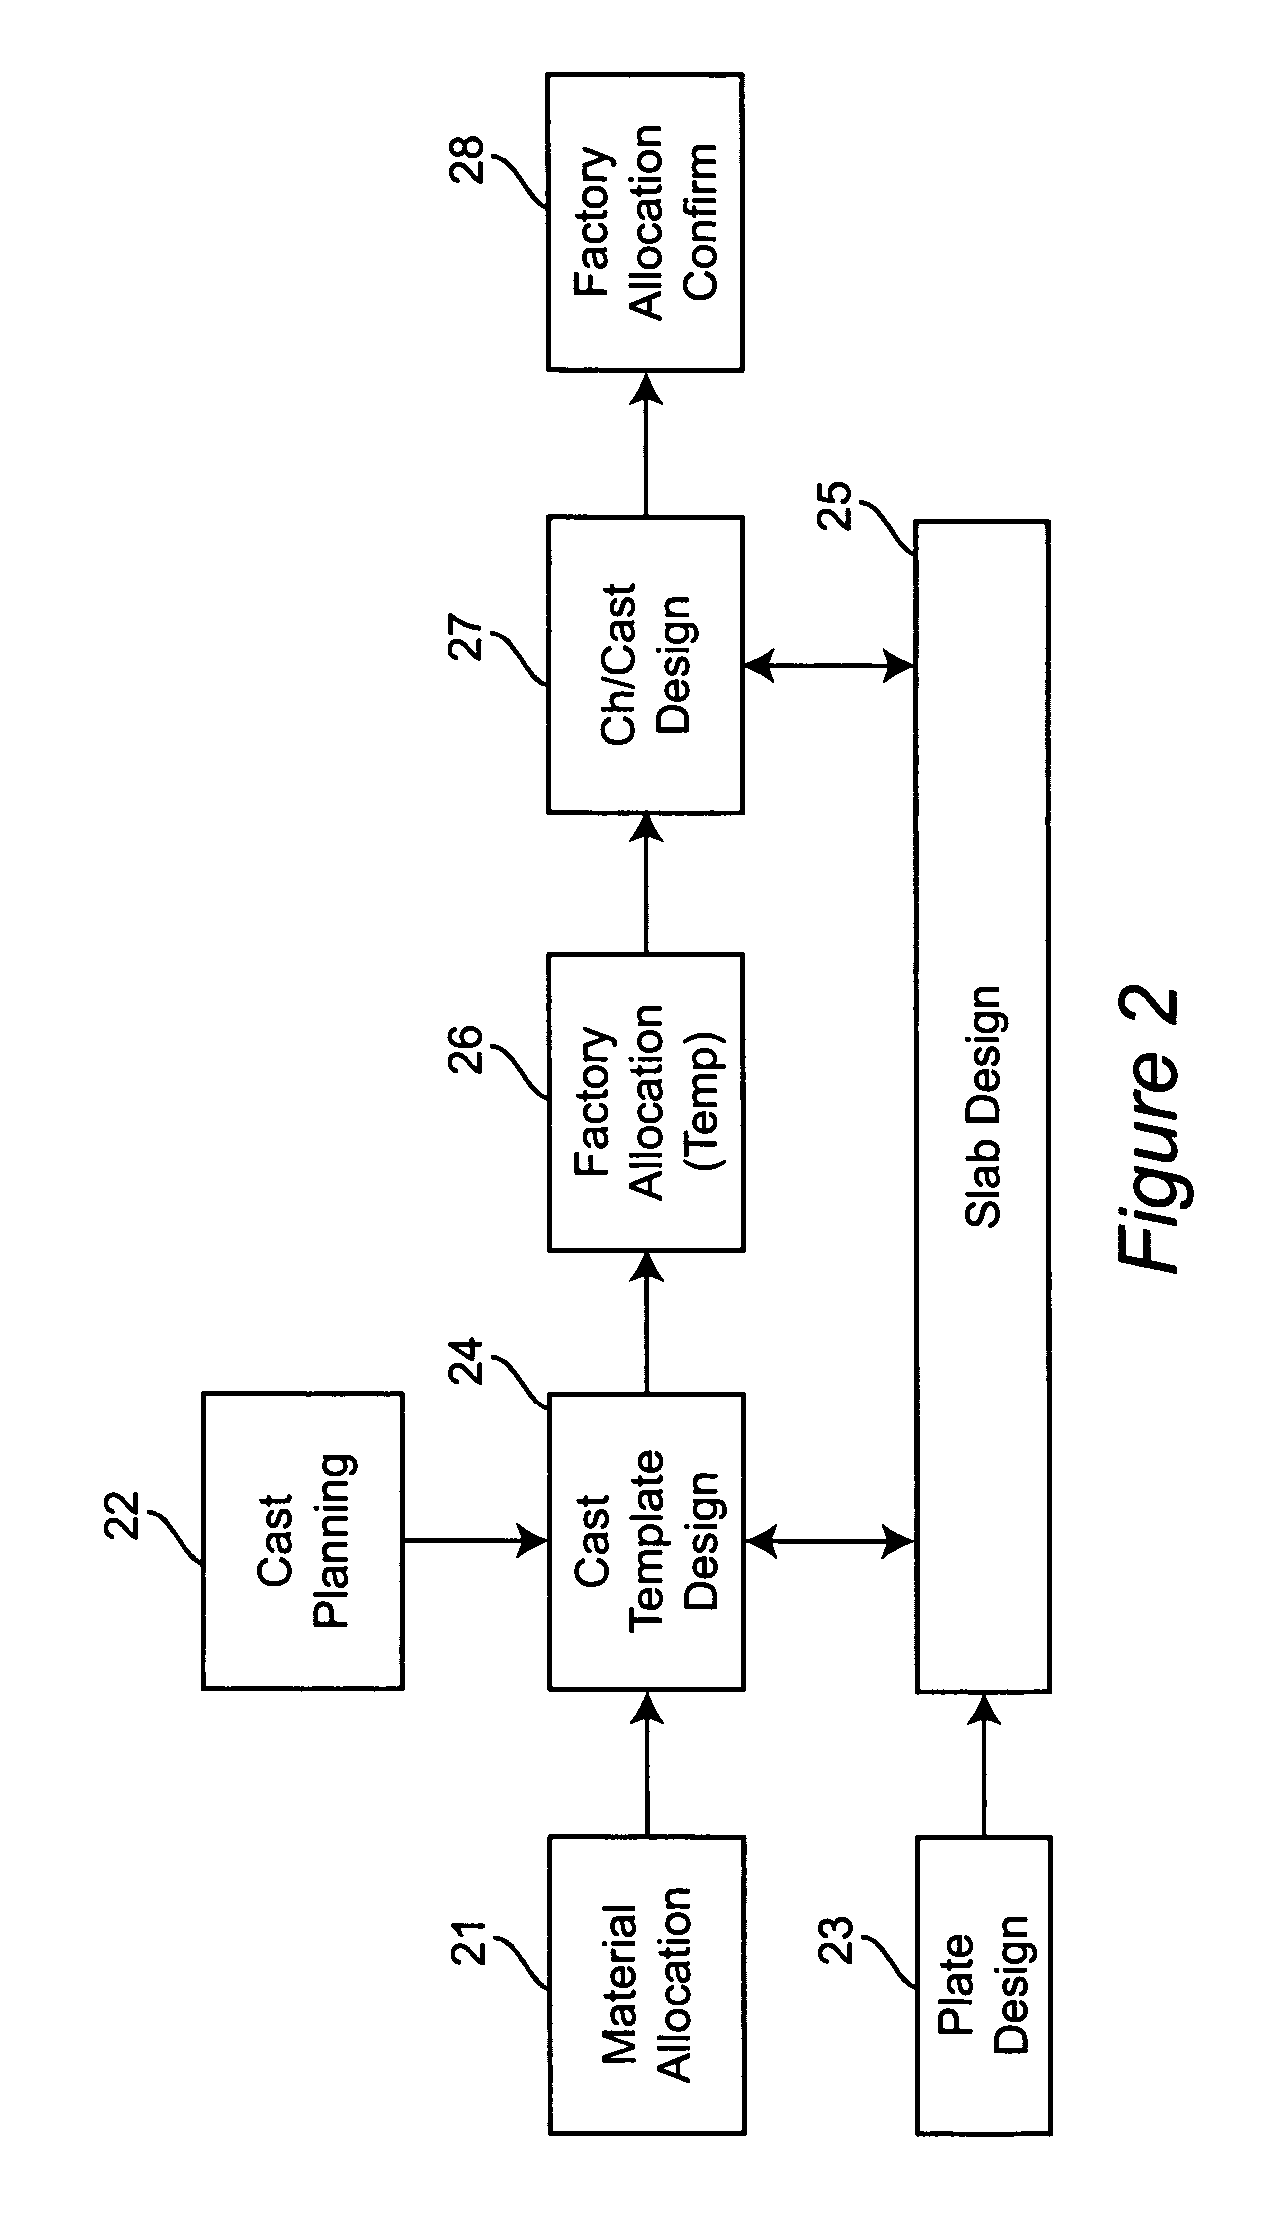 Method for production design and operations scheduling for plate design in the steel industry